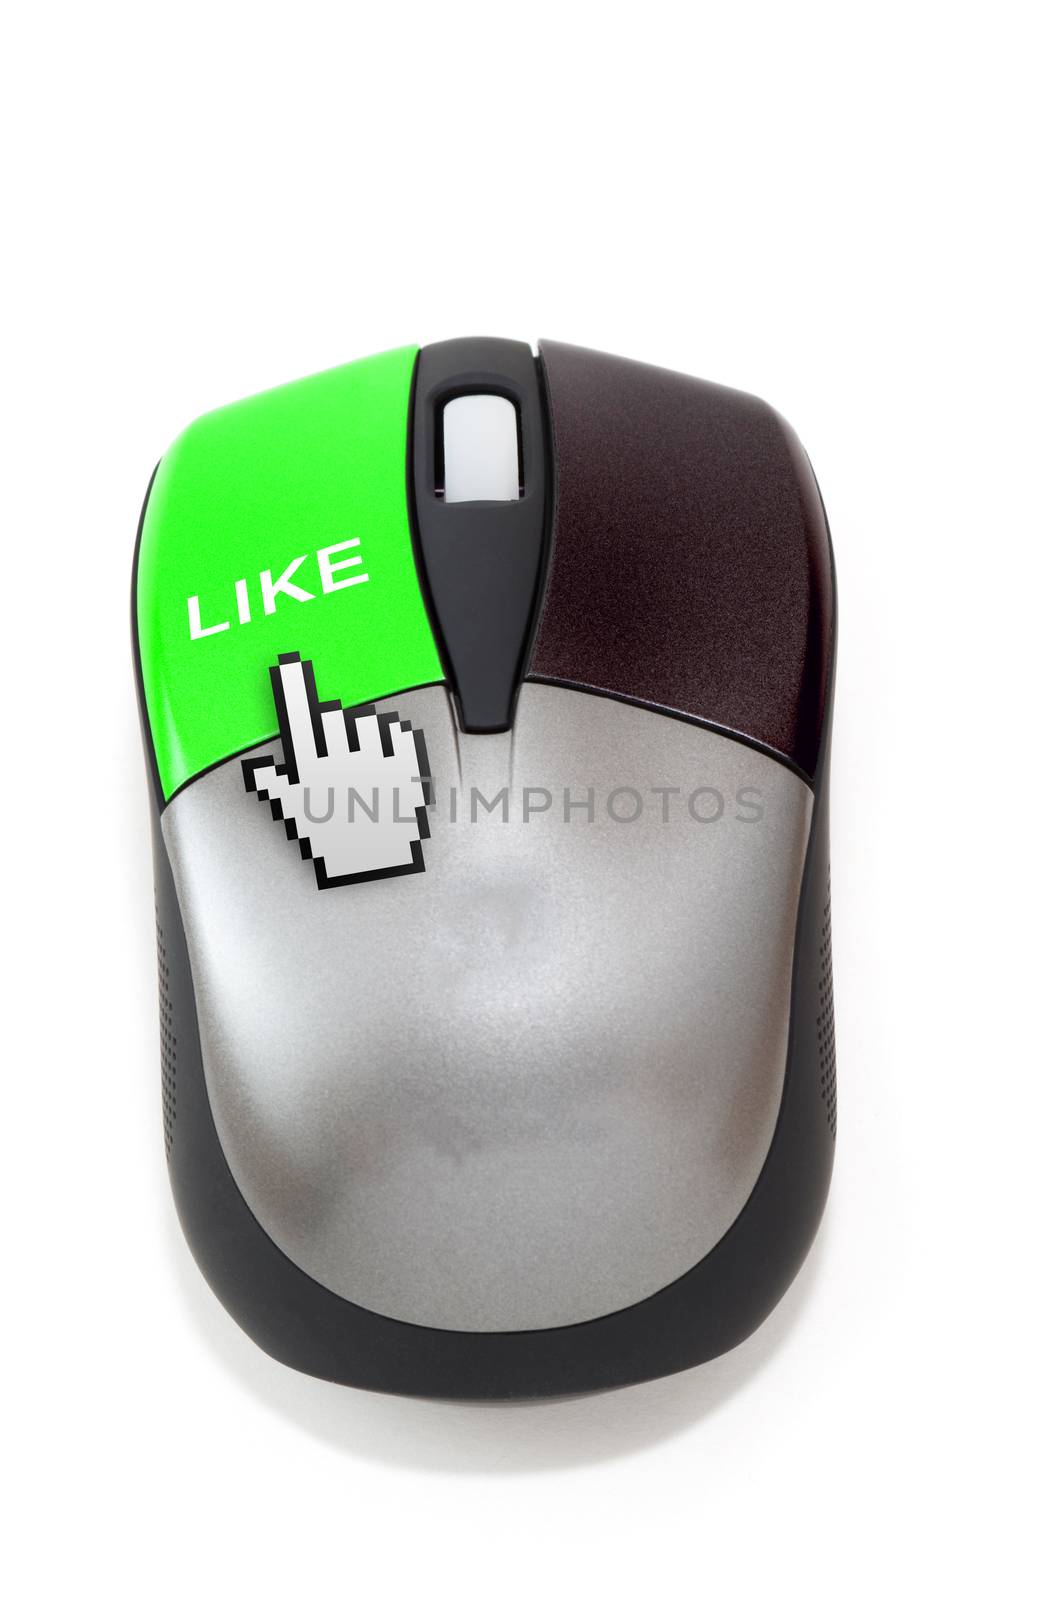 Hand cursor clicking on like button by daoleduc